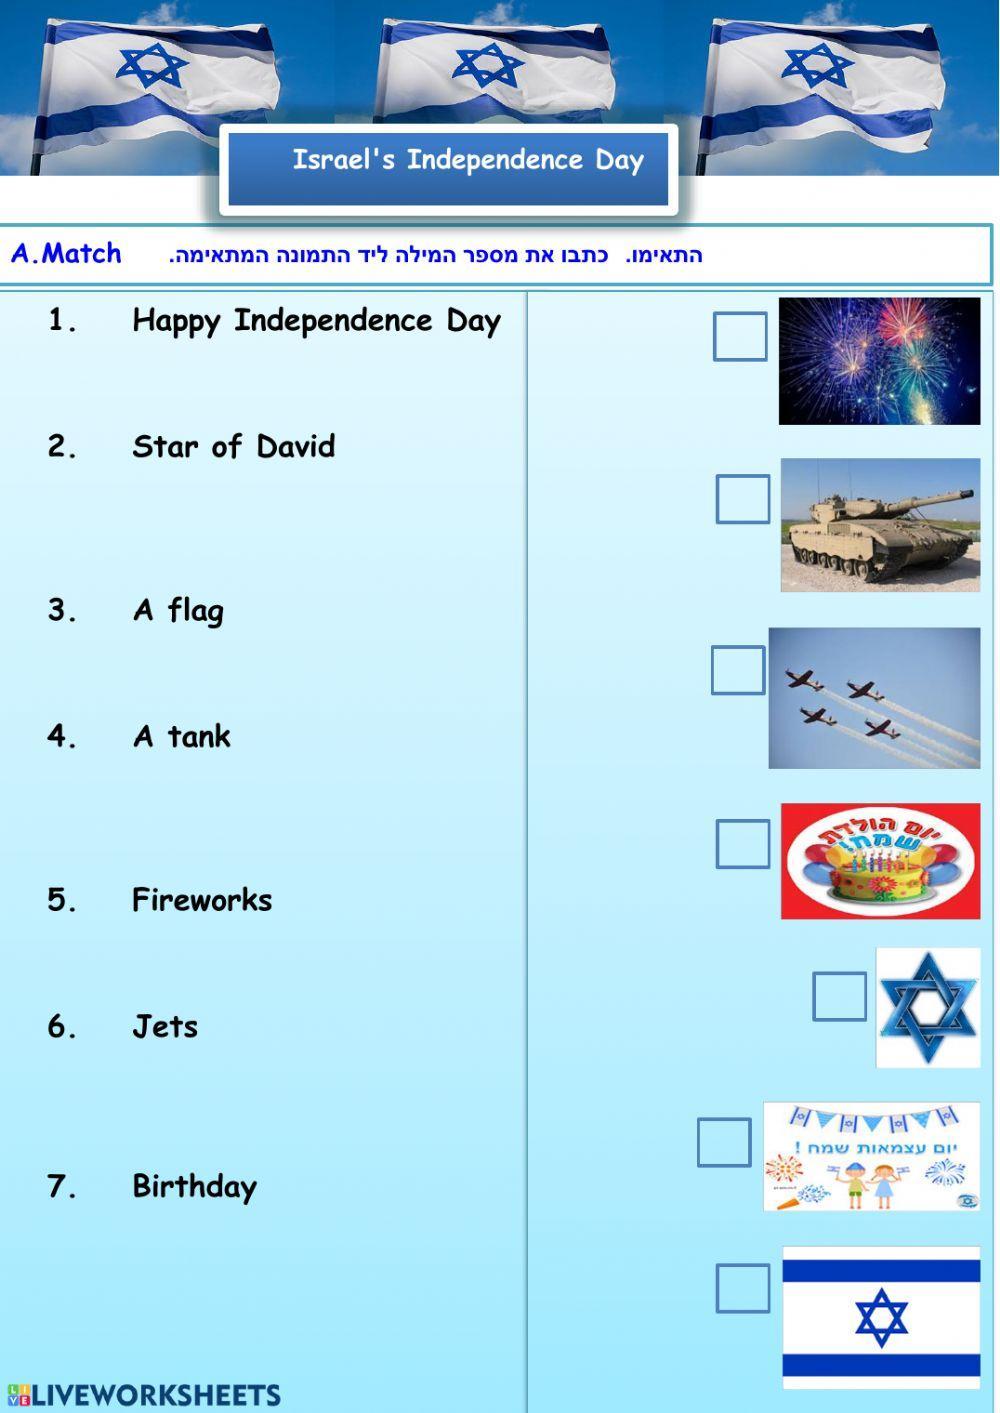 Israel's Independence Day - words